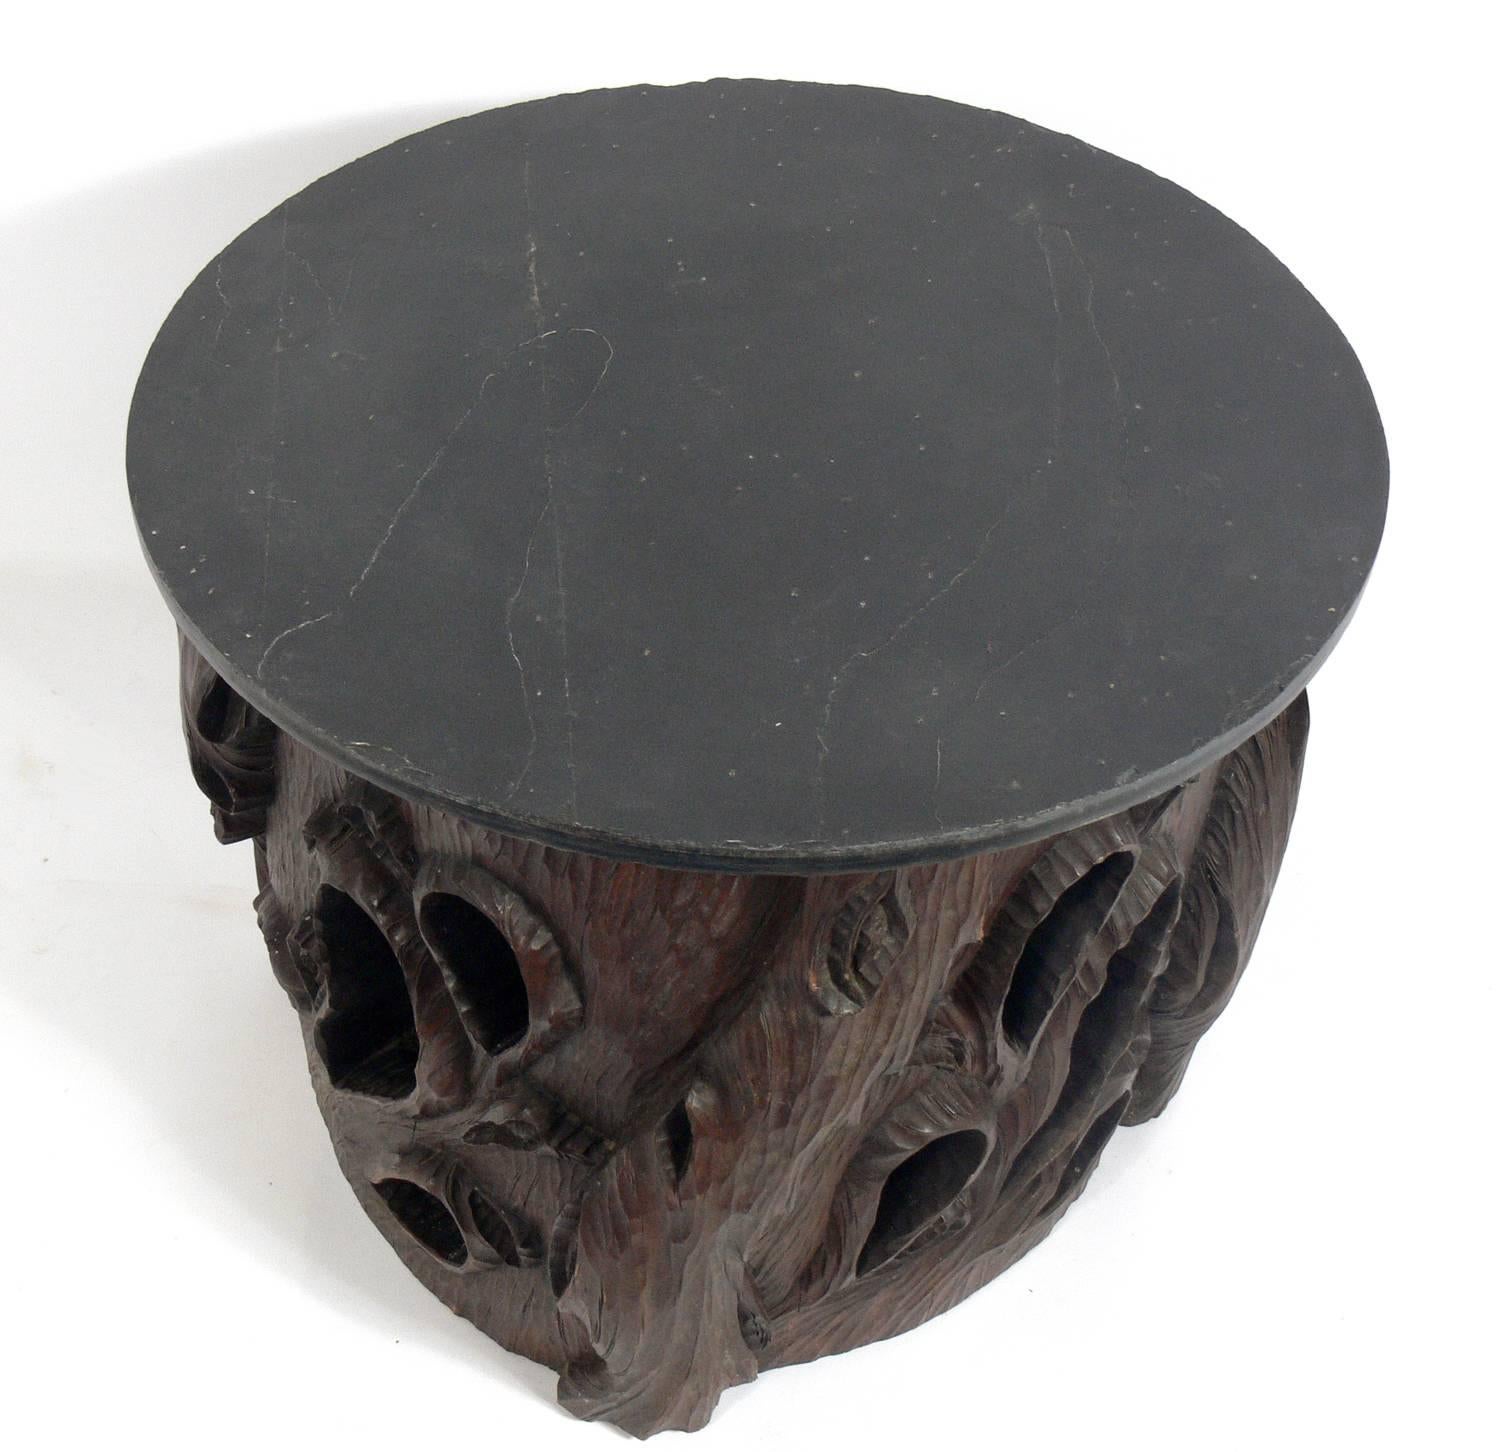 Hand-carved Japanese stump table with slate top, believed to be circa 1950s, possibly earlier. This table has an incredible hand-carved base, made out of one solid tree stump and is surmounted with a slate top. It is a versatile size and can be used